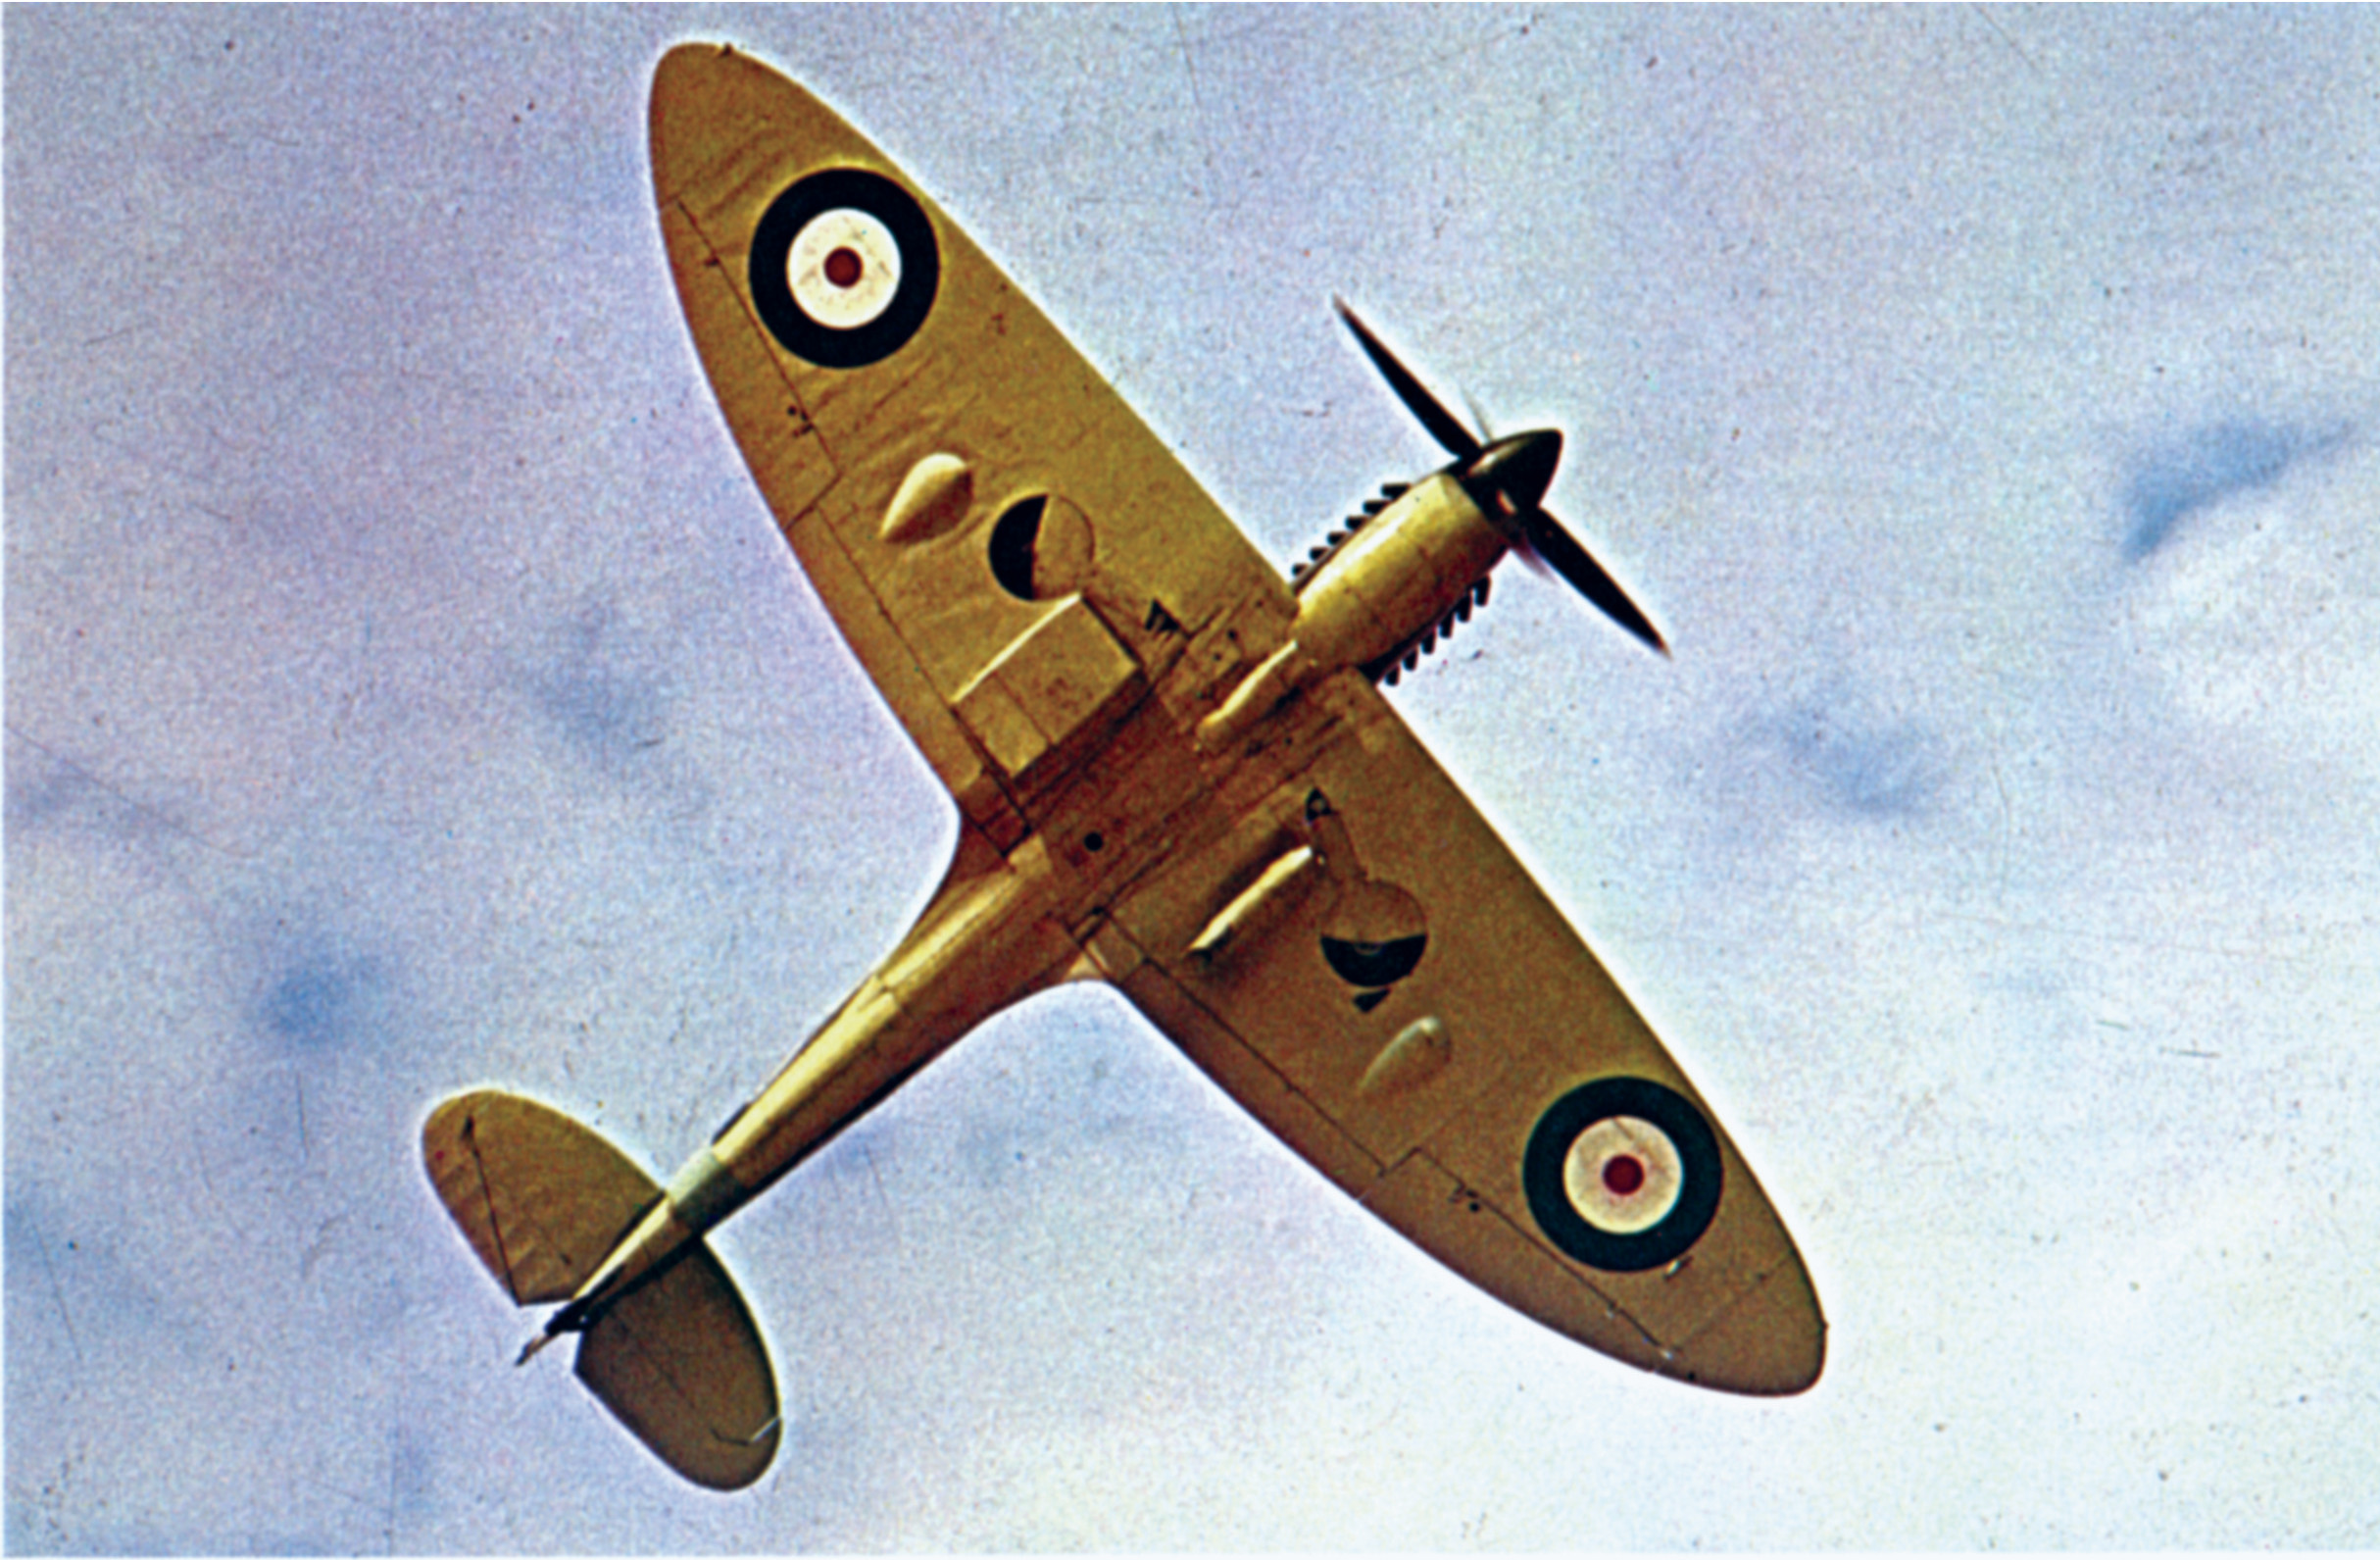 The distinctive elliptical wings of the Supermarine Spitfire are clearly visible in this photograph. The distinctive design made identification of the fighter easy and provided better aerodynamics. (Rue des Archives/The Granger Collection, New York. Below: National Archives)